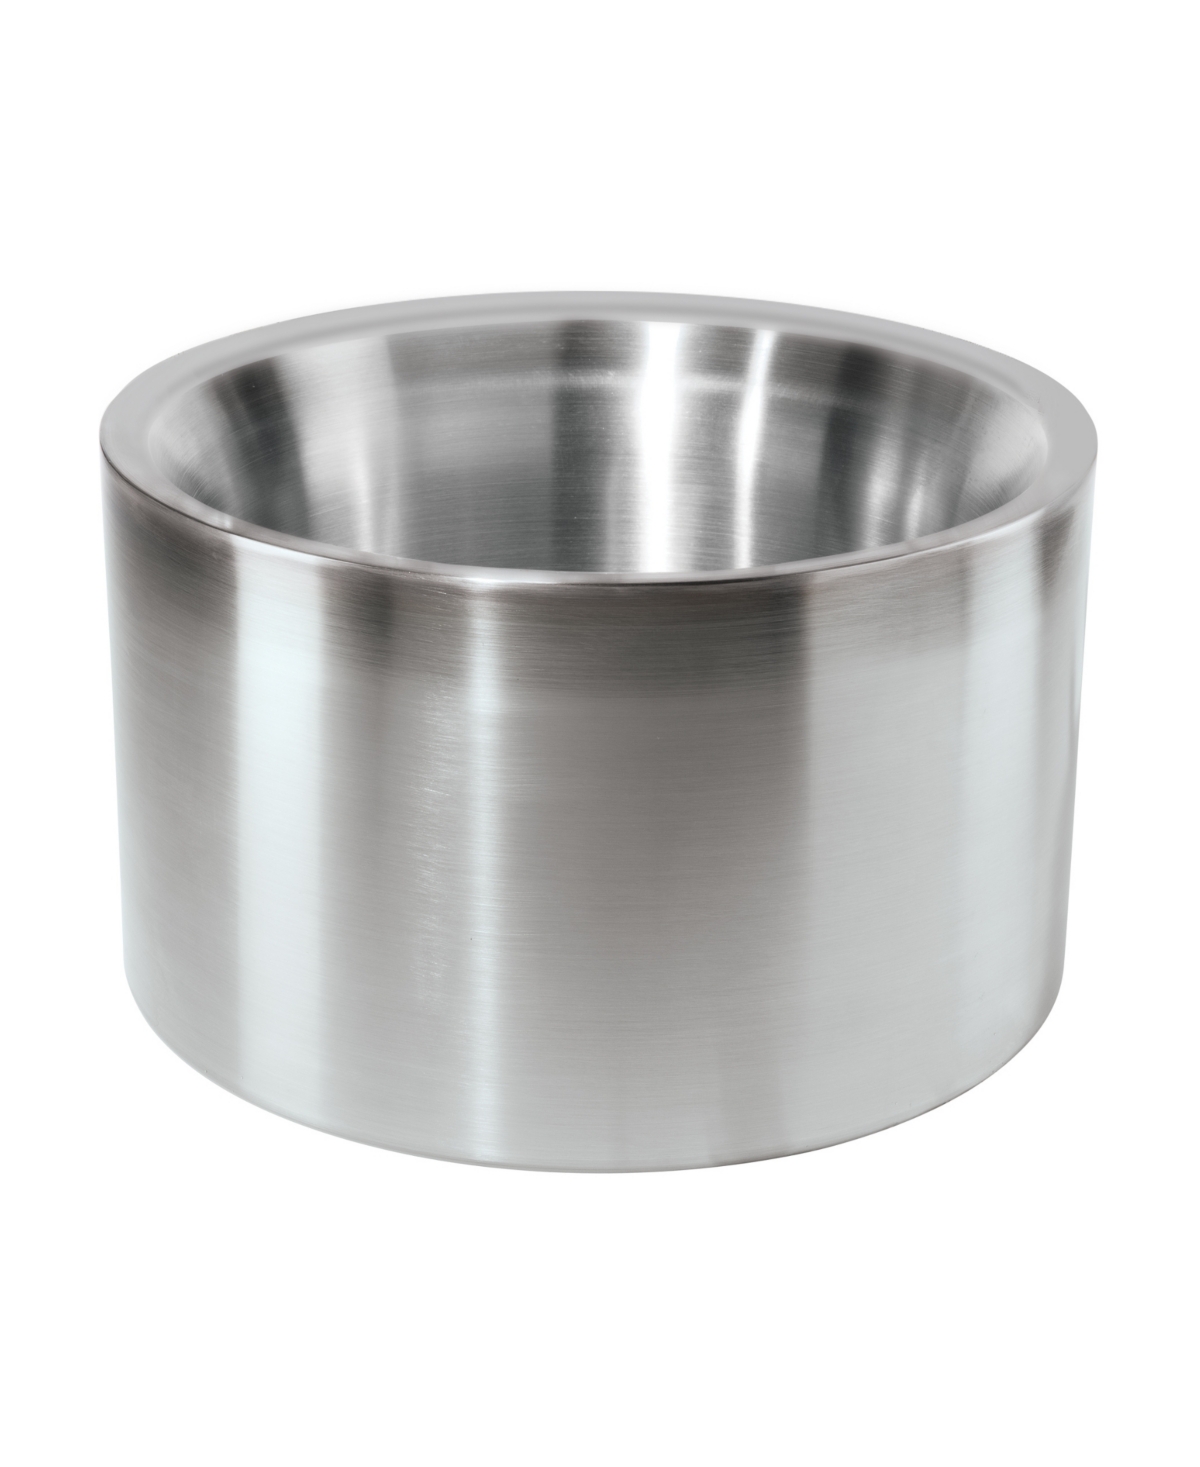 Oggi 6" Party Tub In Stainless Steel